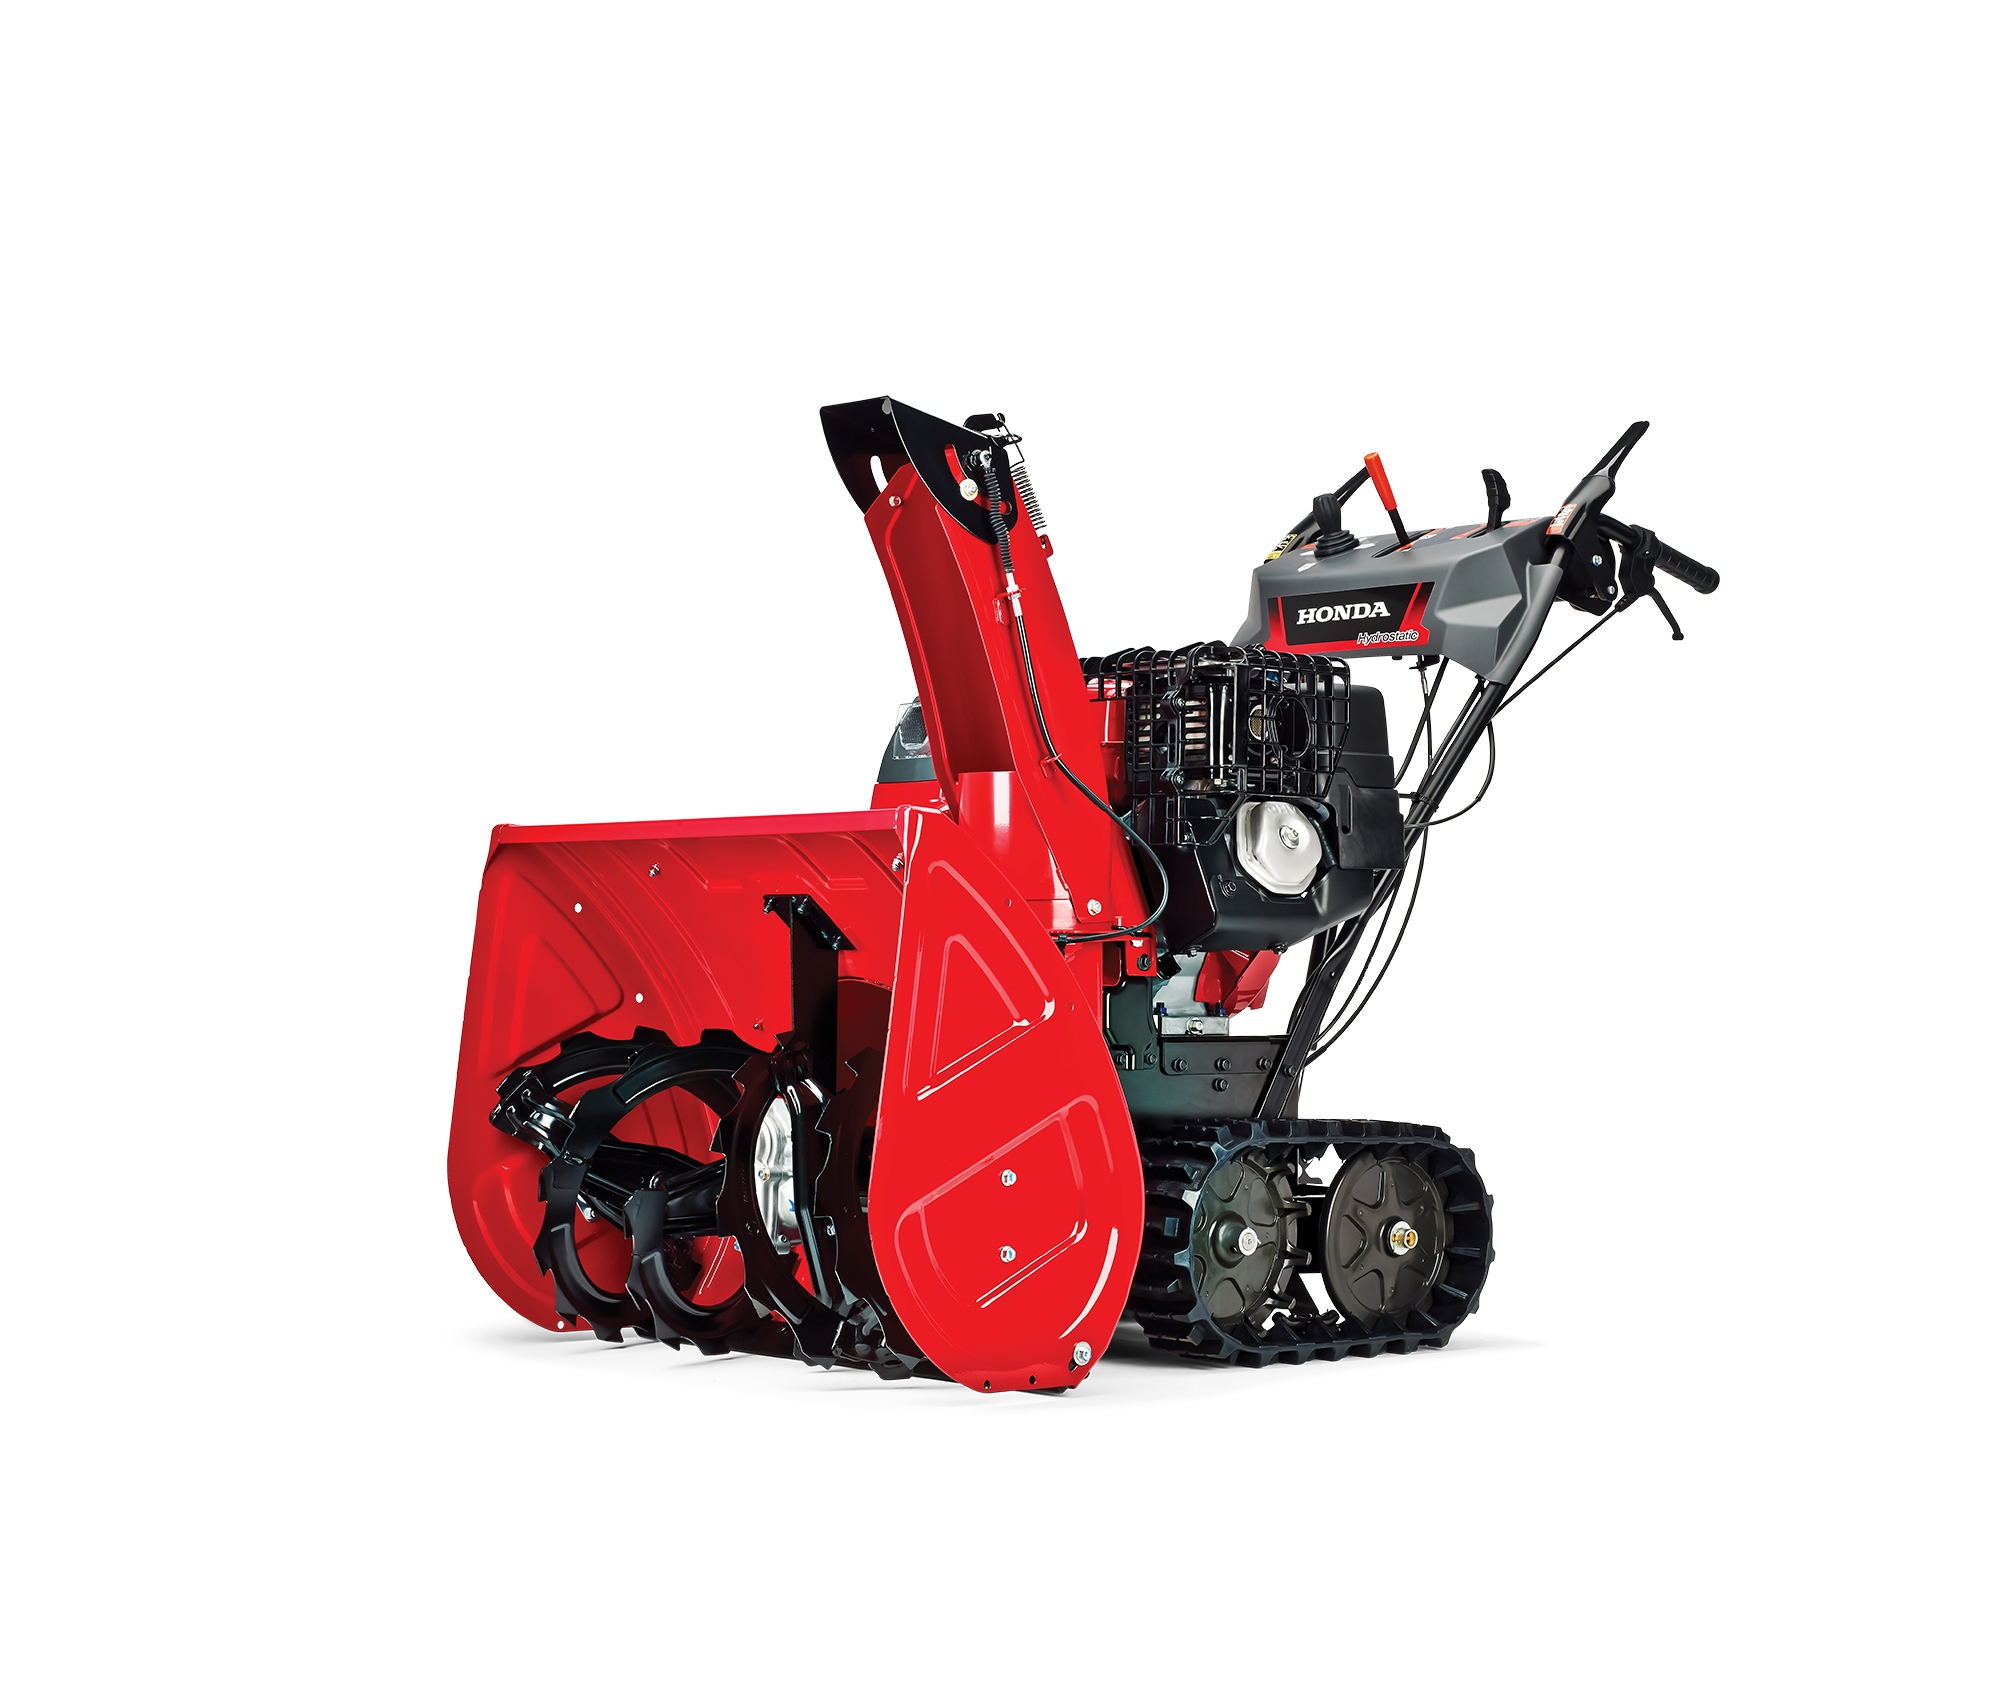 Image of the 28" Track-Drive  Snowblower